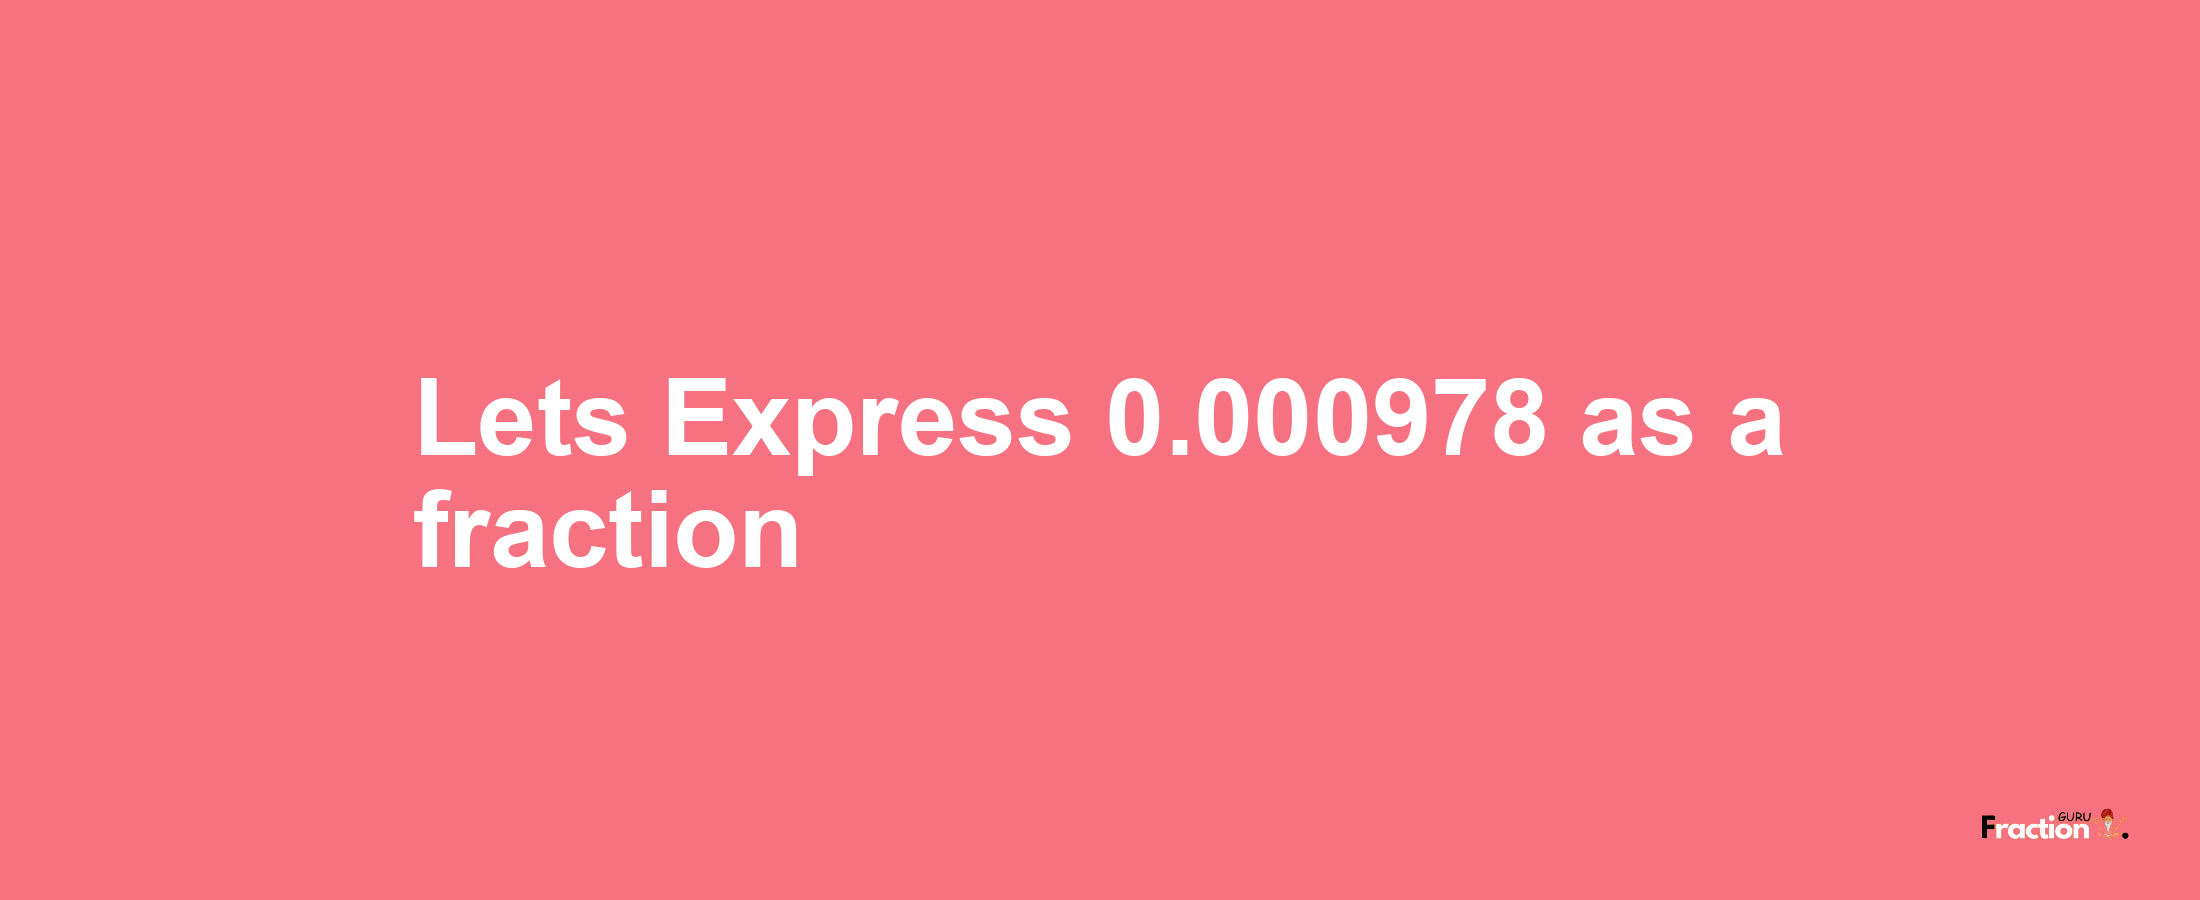 Lets Express 0.000978 as afraction